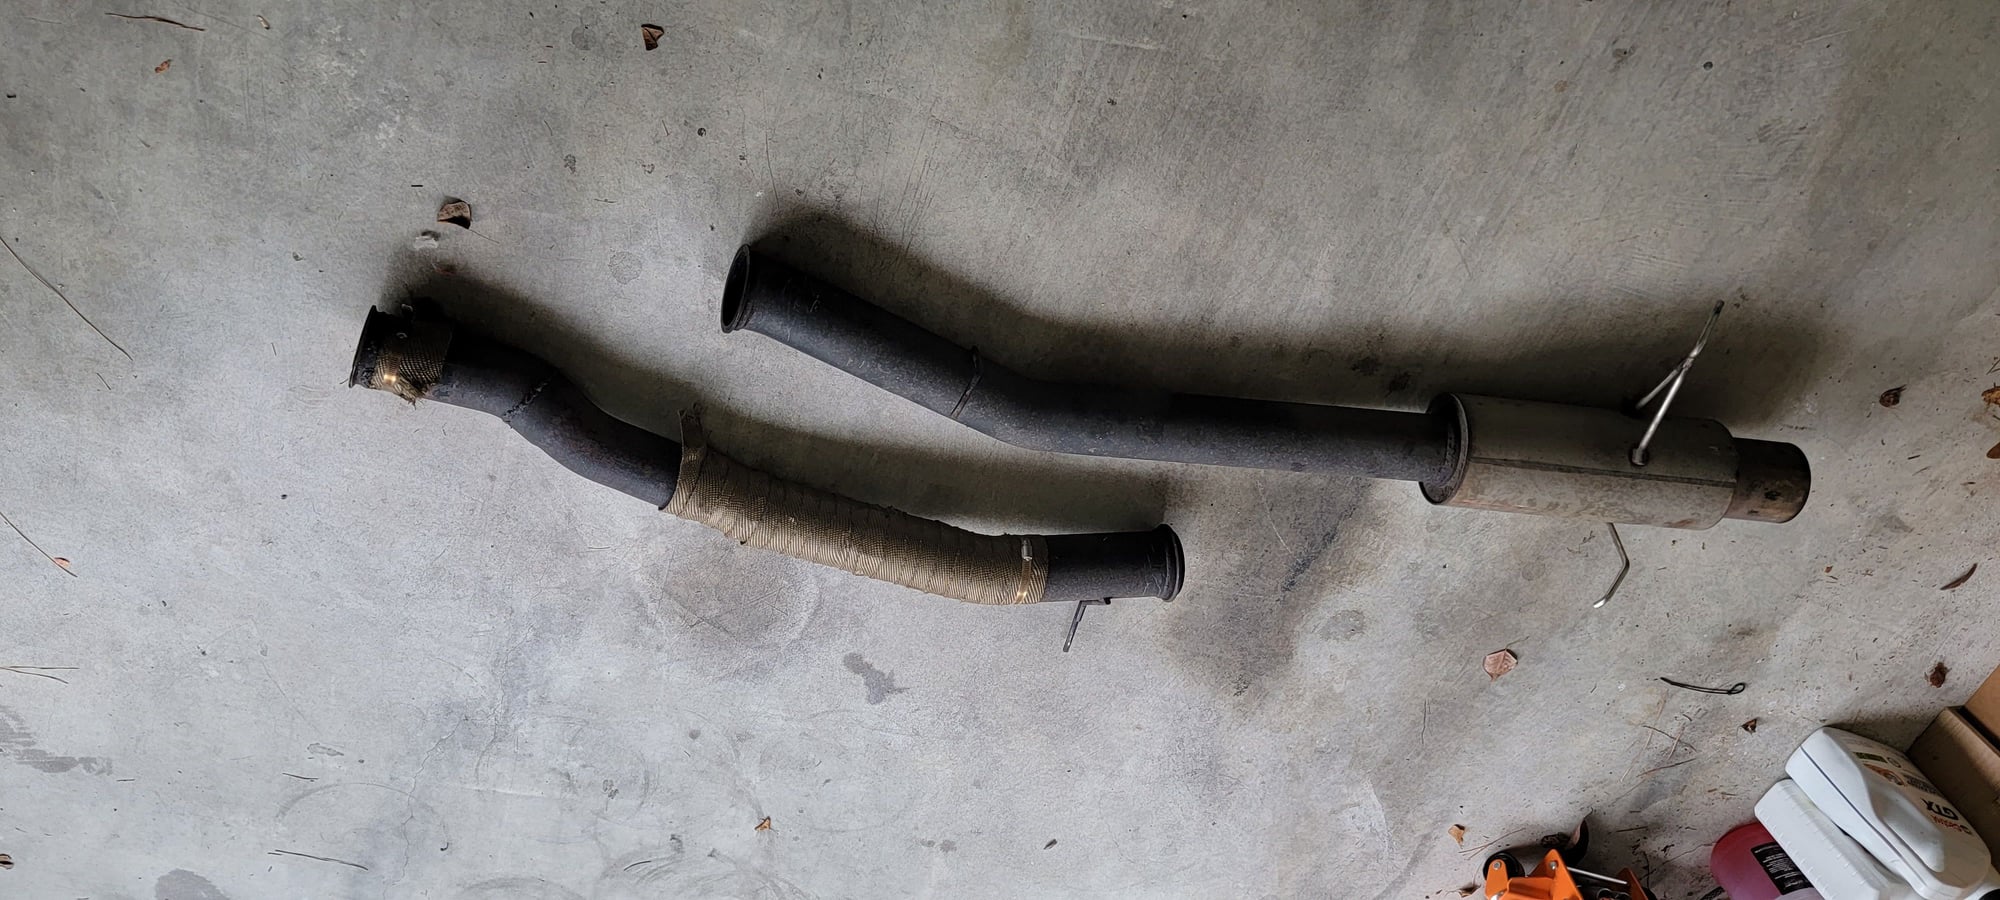 Engine - Exhaust - Fd Rx7 3 Inch Exhaust - Used - 1992 to 2001 Mazda RX-7 - Niceville, FL 32578, United States